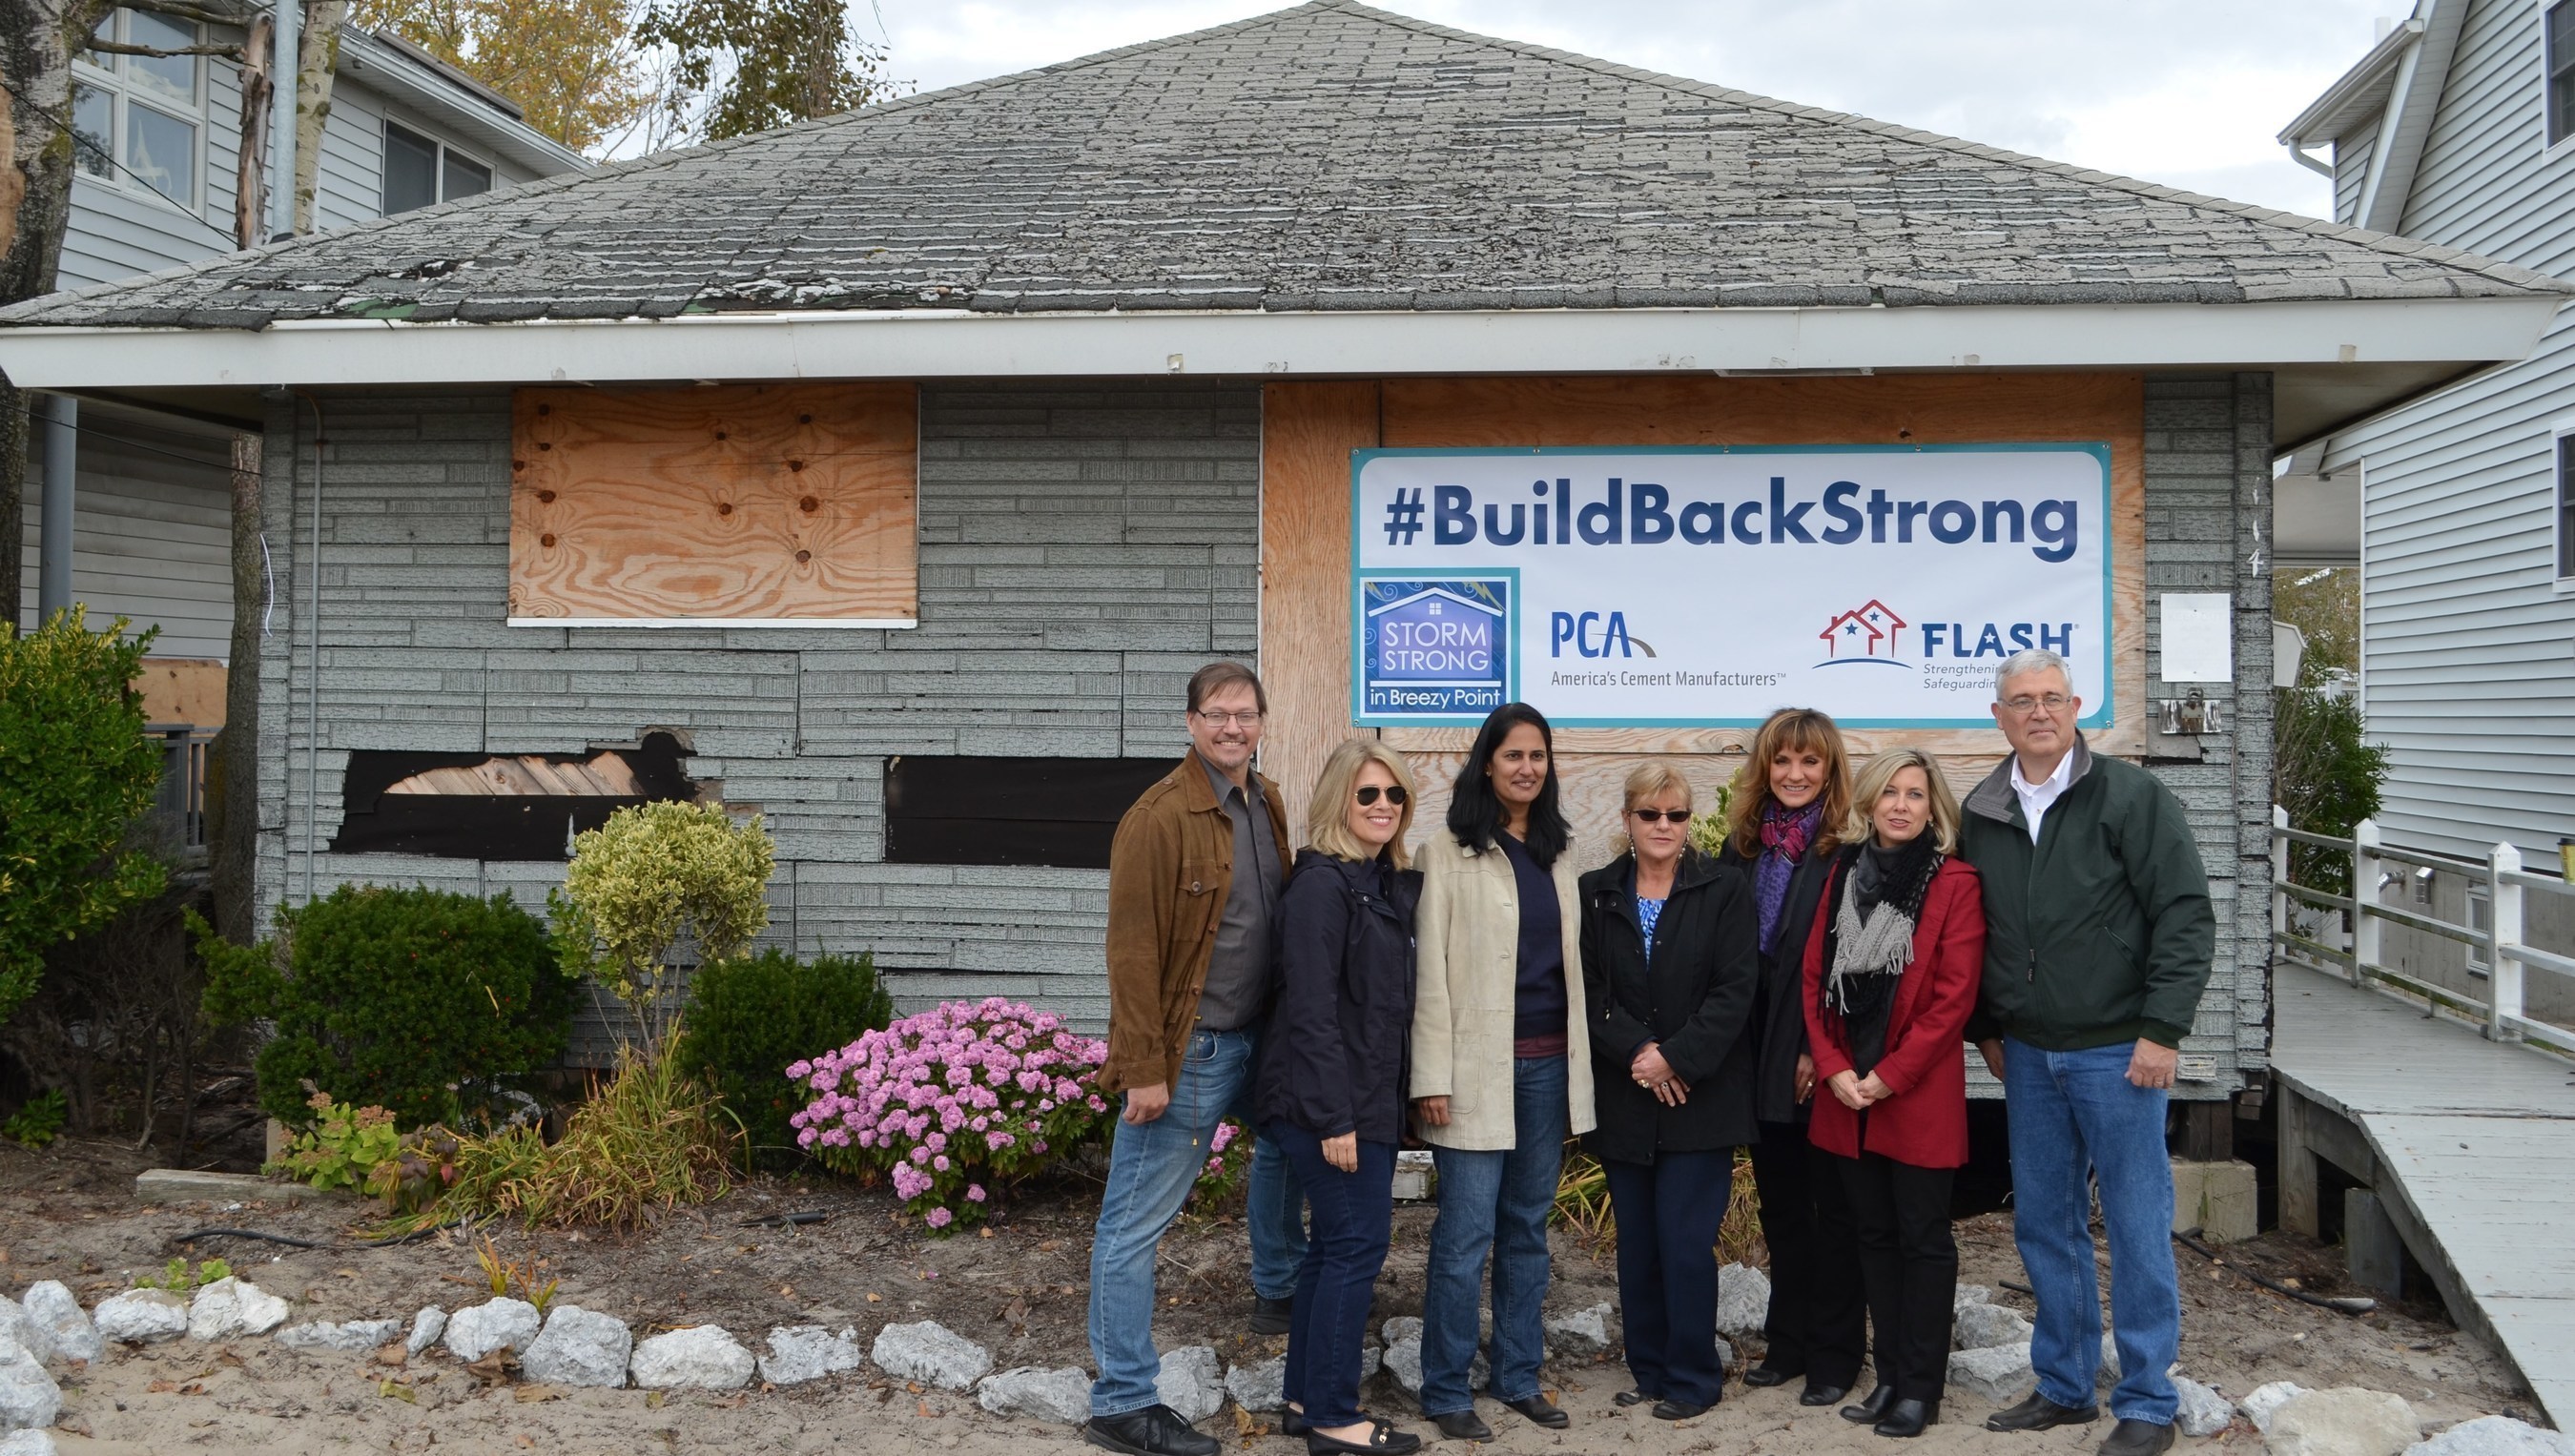 Organizations Rally to Rebuild Storm-Strong Home after Superstorm Sandy